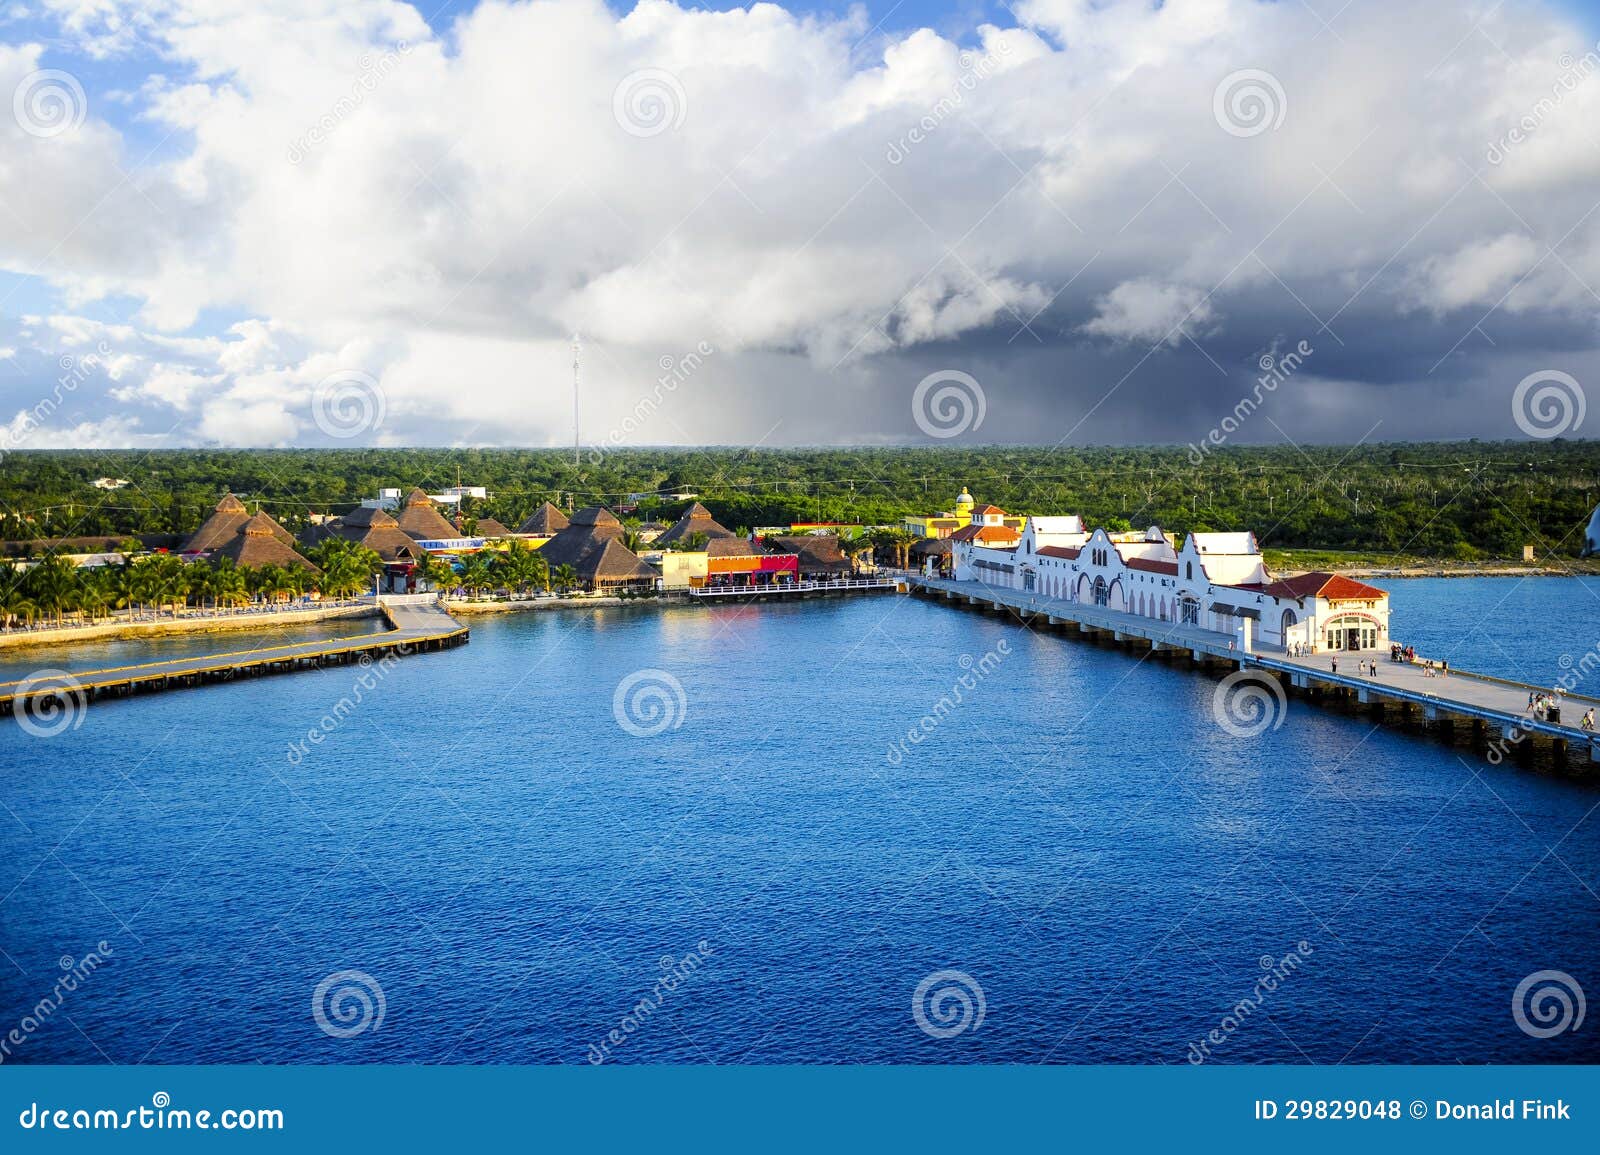 port at cozumel, mexico